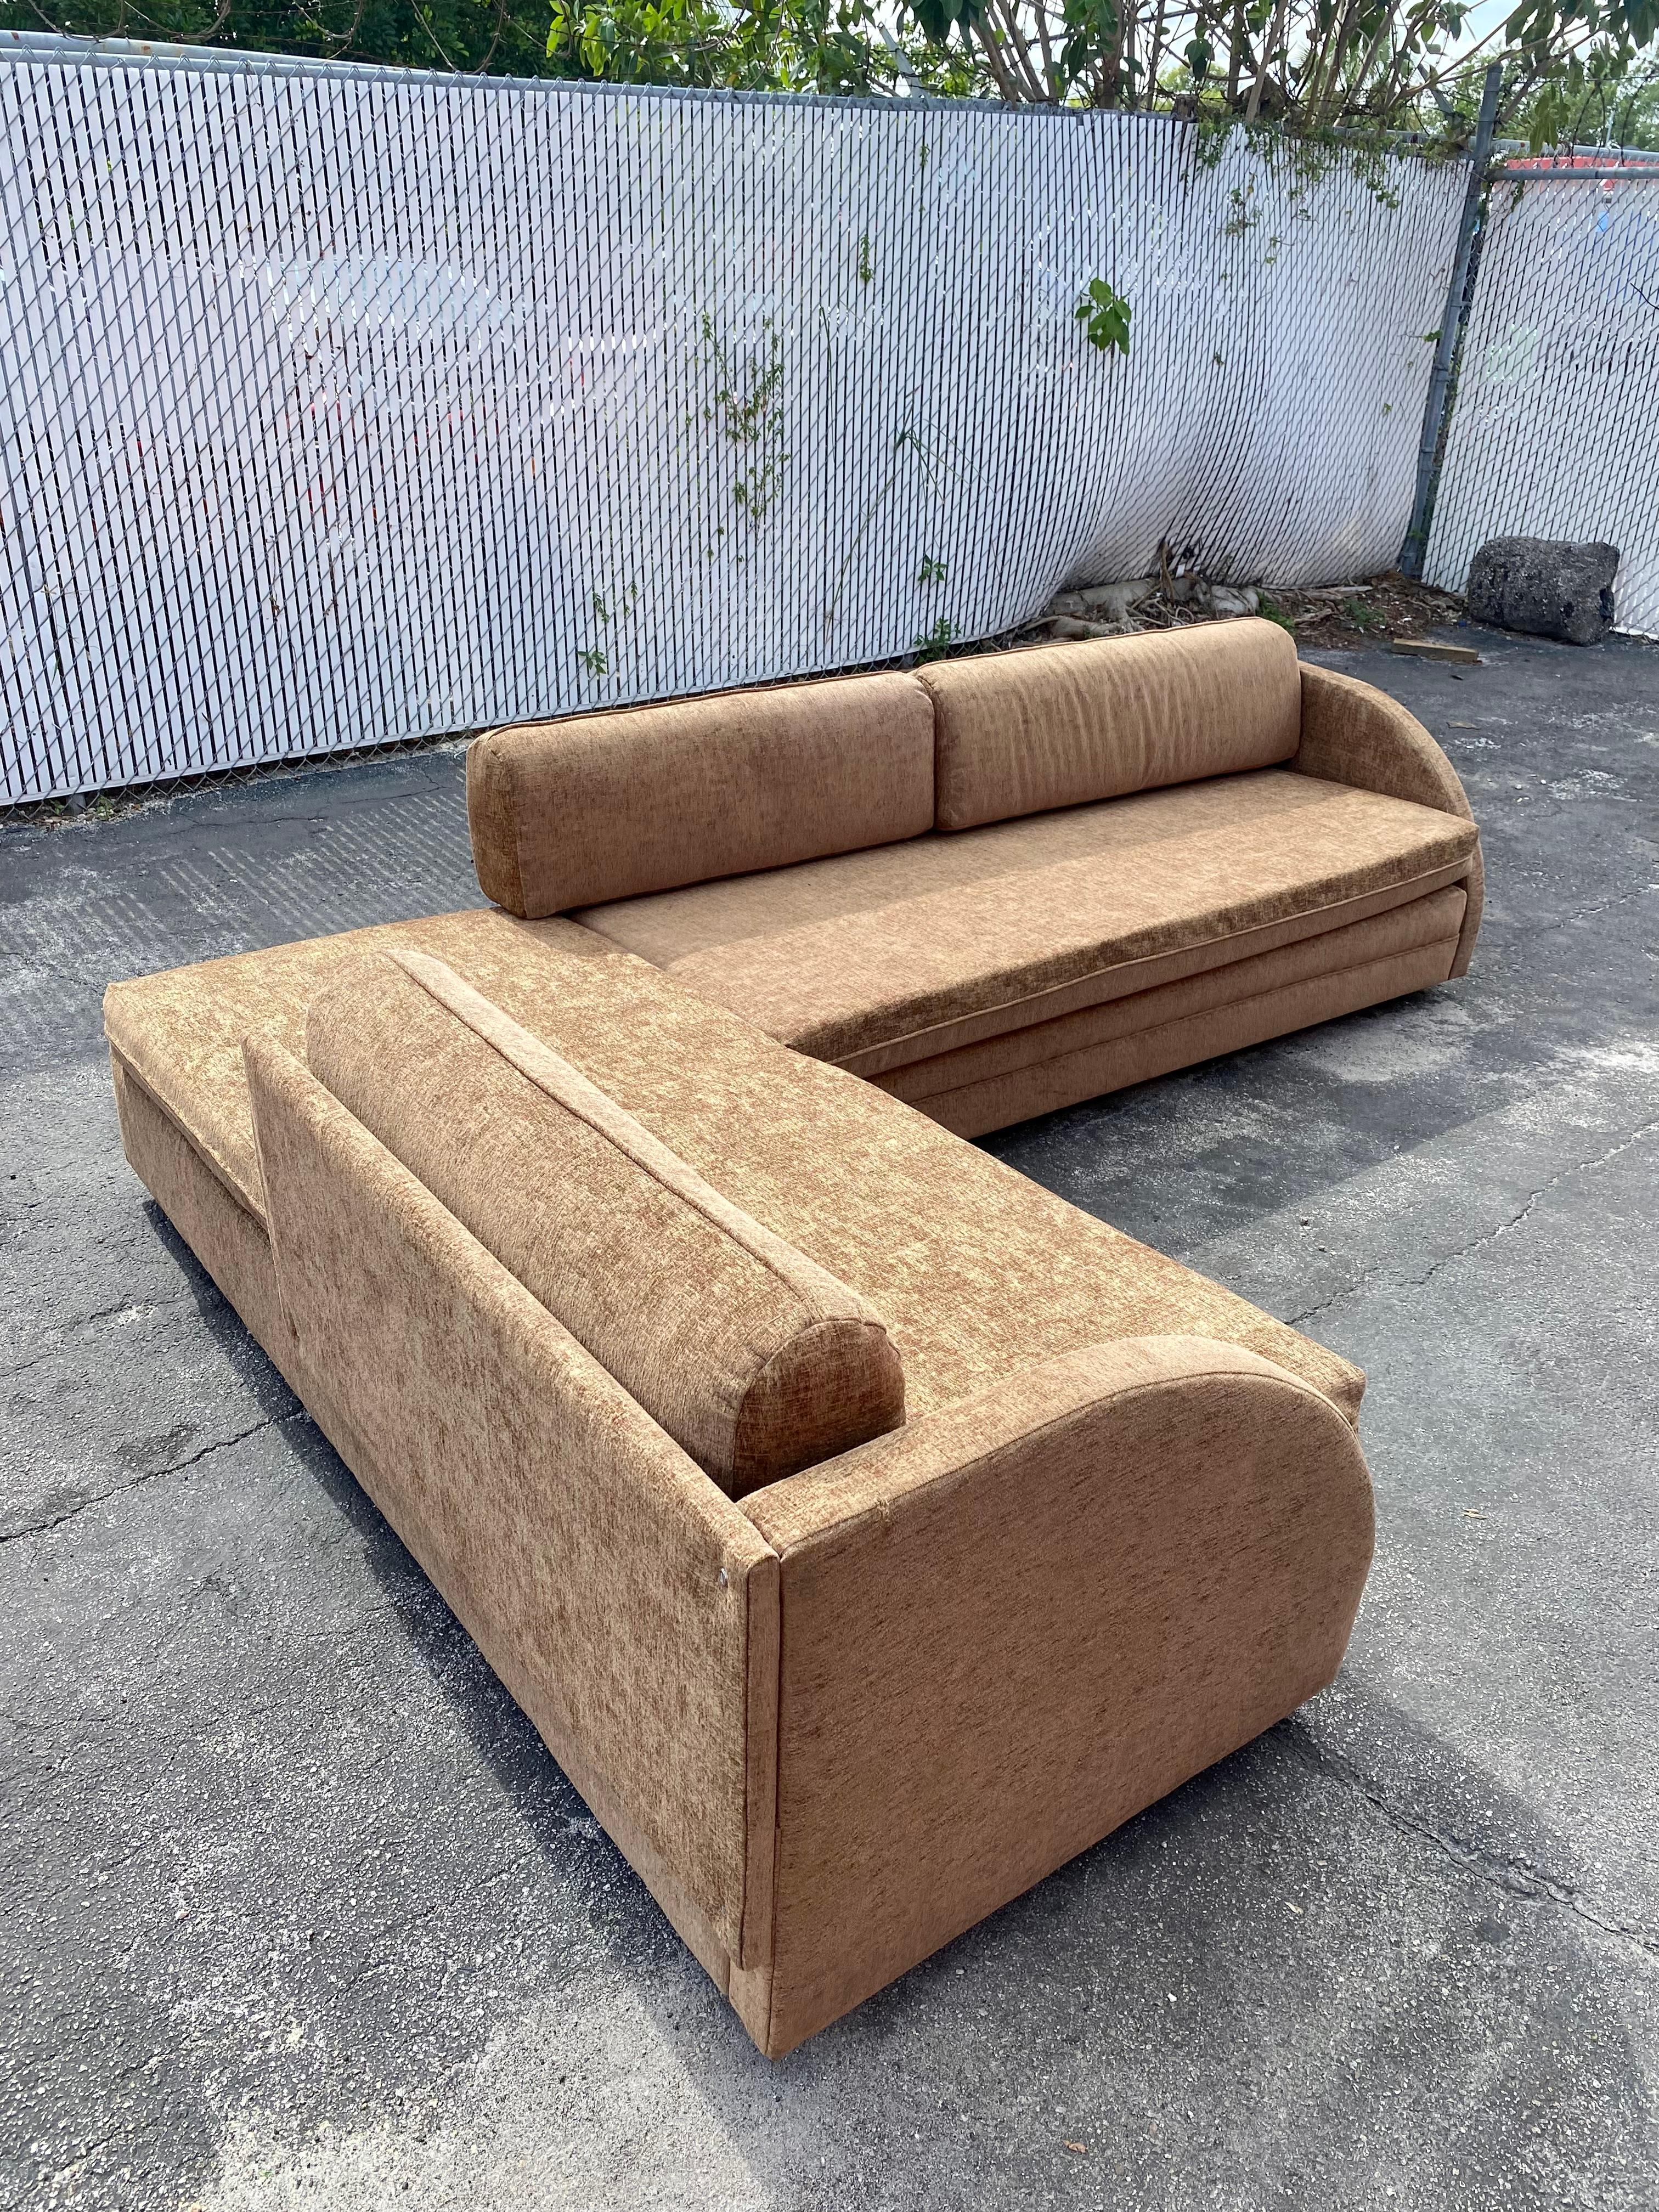 1970s Modular Slim Chenille Tan Sectional on Castors  In Good Condition For Sale In Fort Lauderdale, FL